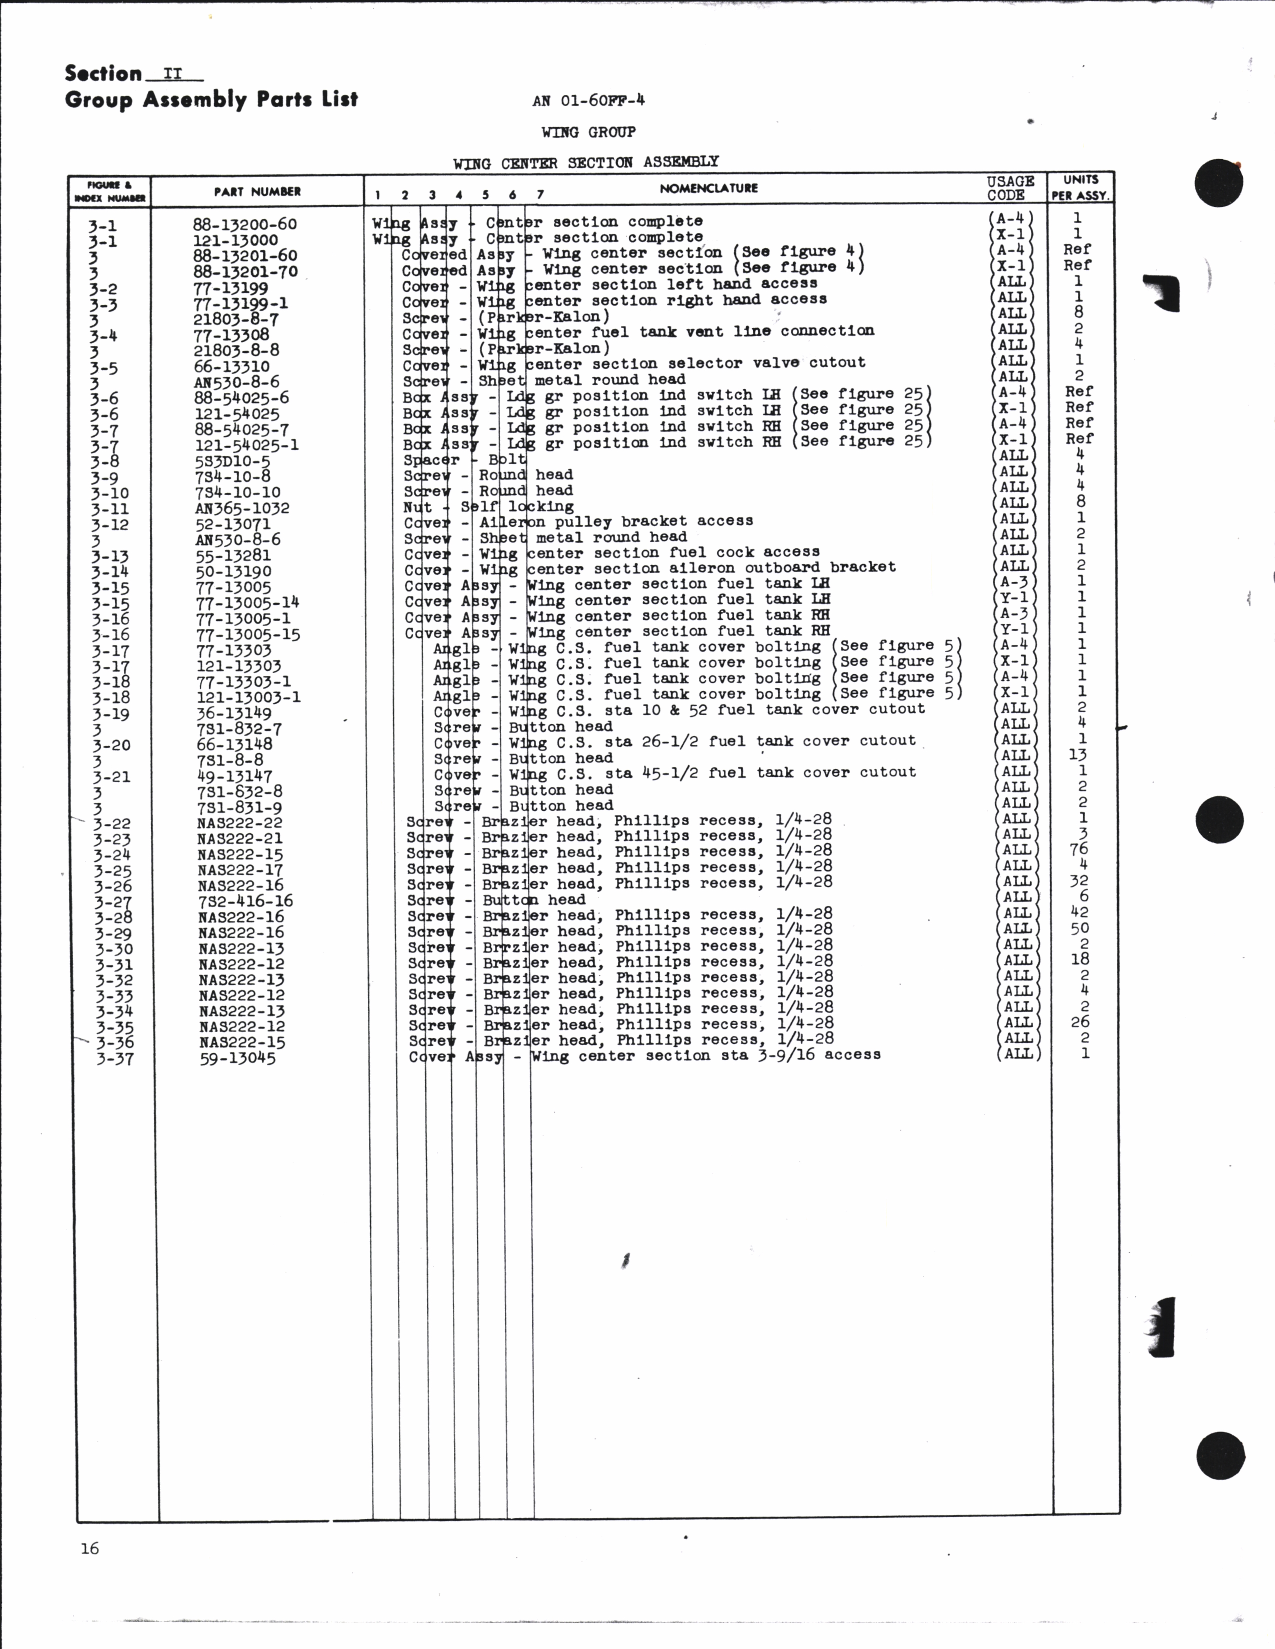 Sample page 3 from AirCorps Library document: Parts Catalog for BT-13A, BT-15, and SNV-1 Models